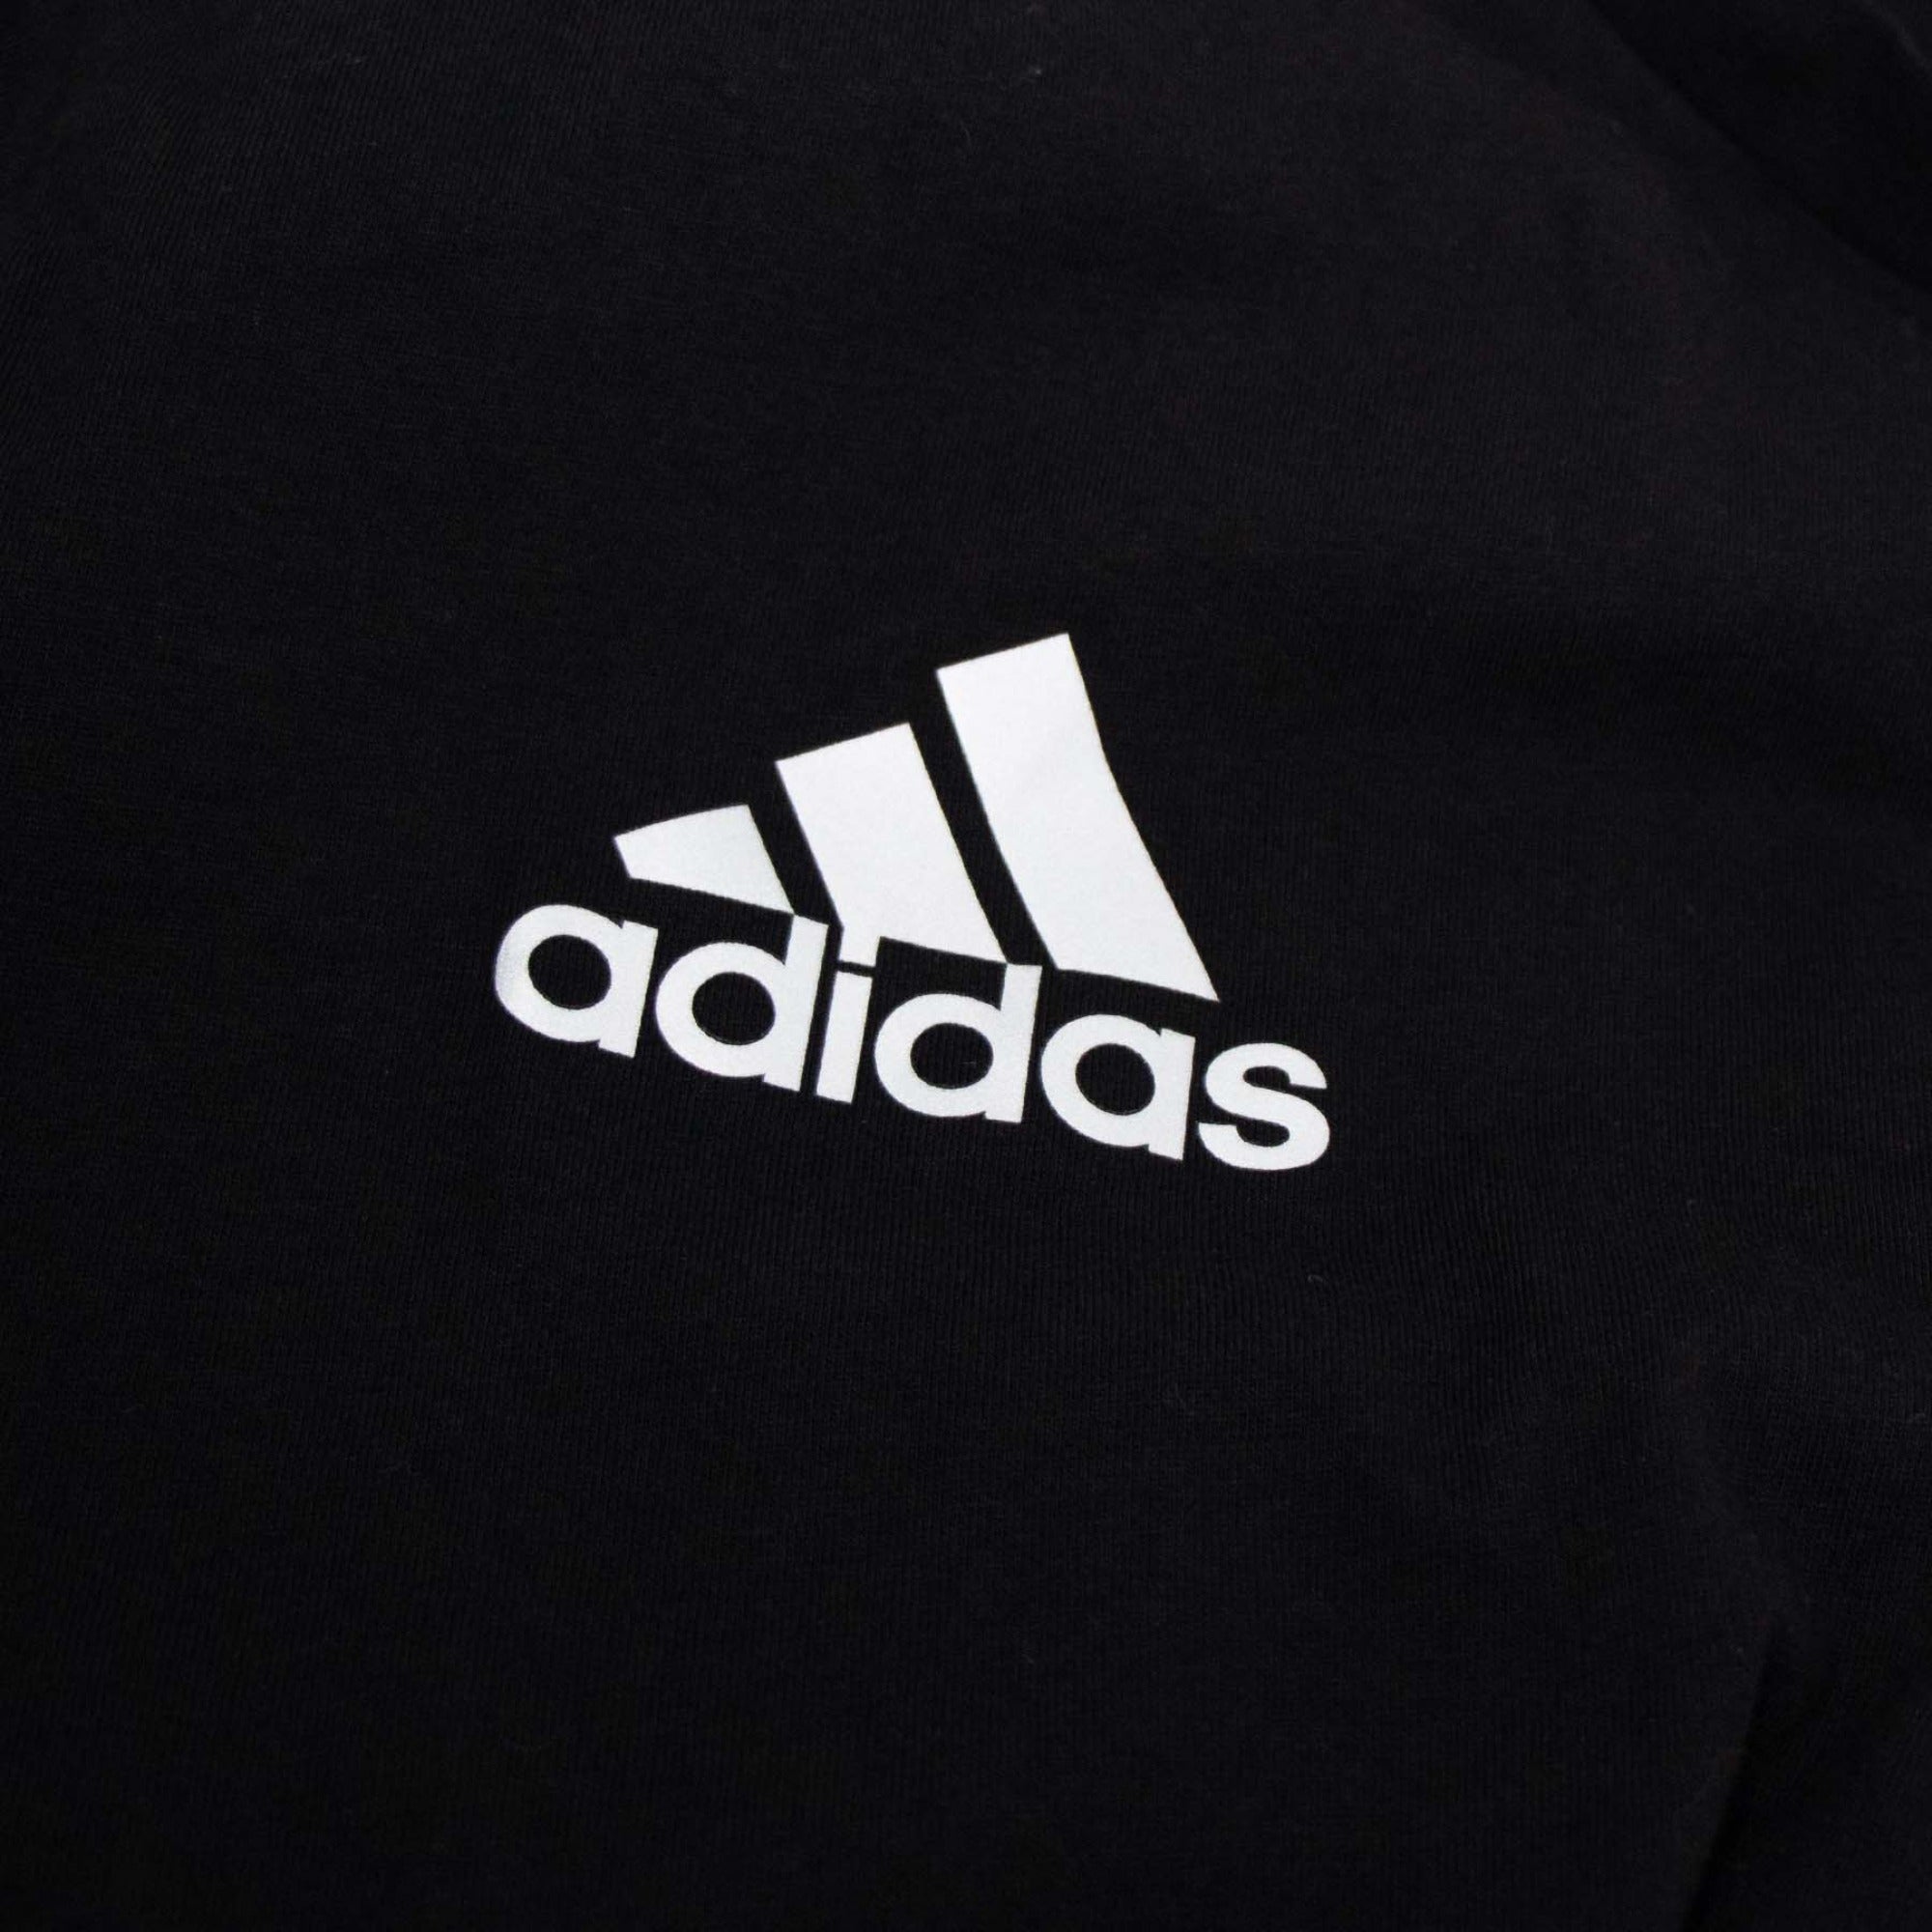 Blacks Cotton T-Shirt by adidas| Zealand Rugby Tee - Black - World Rugby Shop